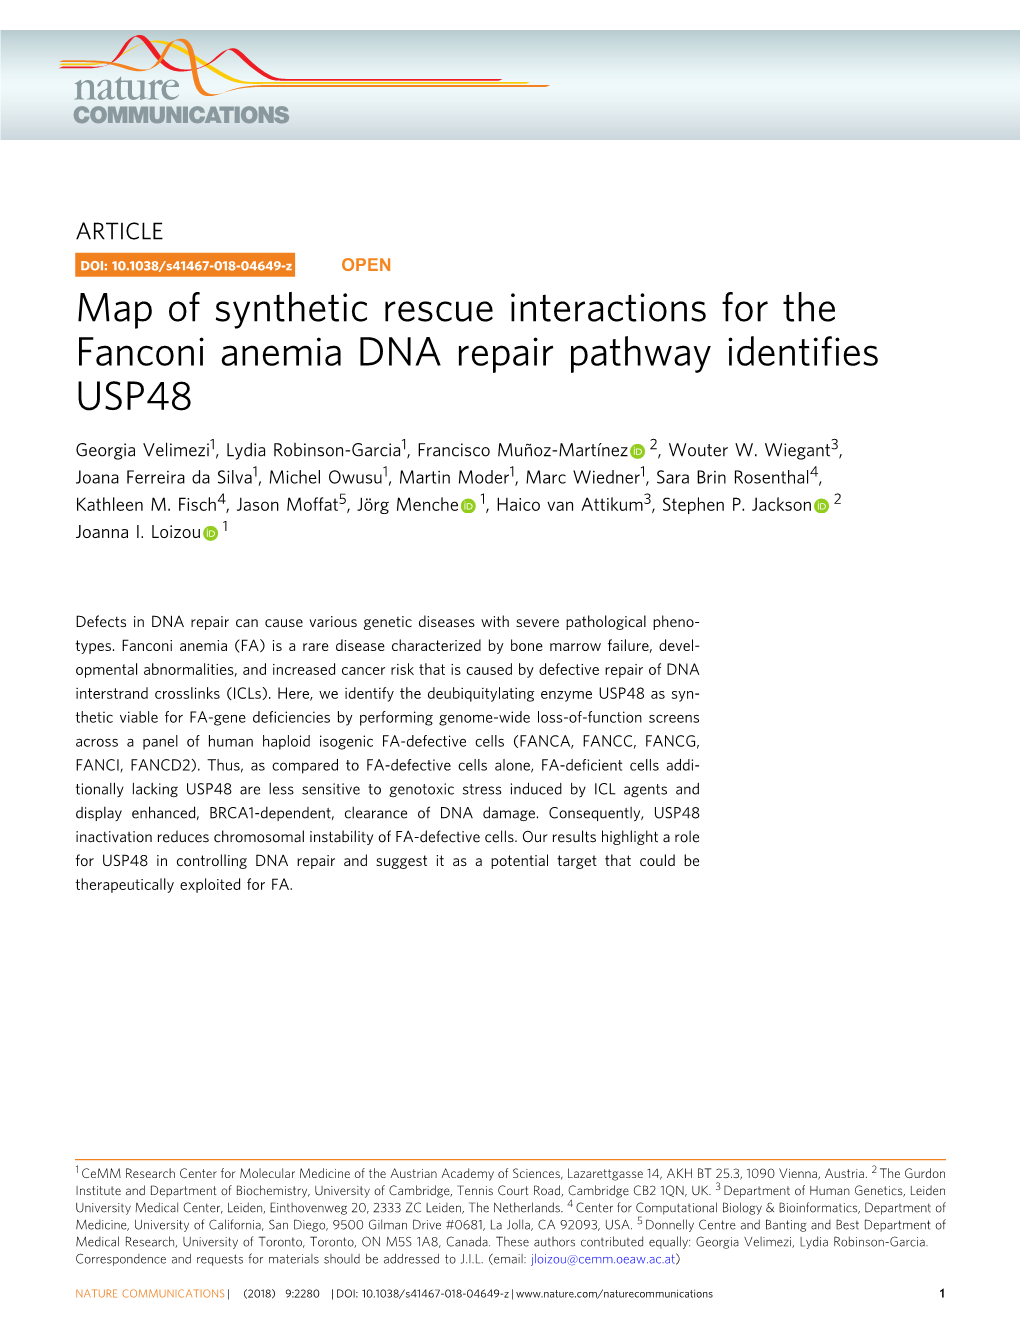 Map of Synthetic Rescue Interactions for the Fanconi Anemia DNA Repair Pathway Identiﬁes USP48